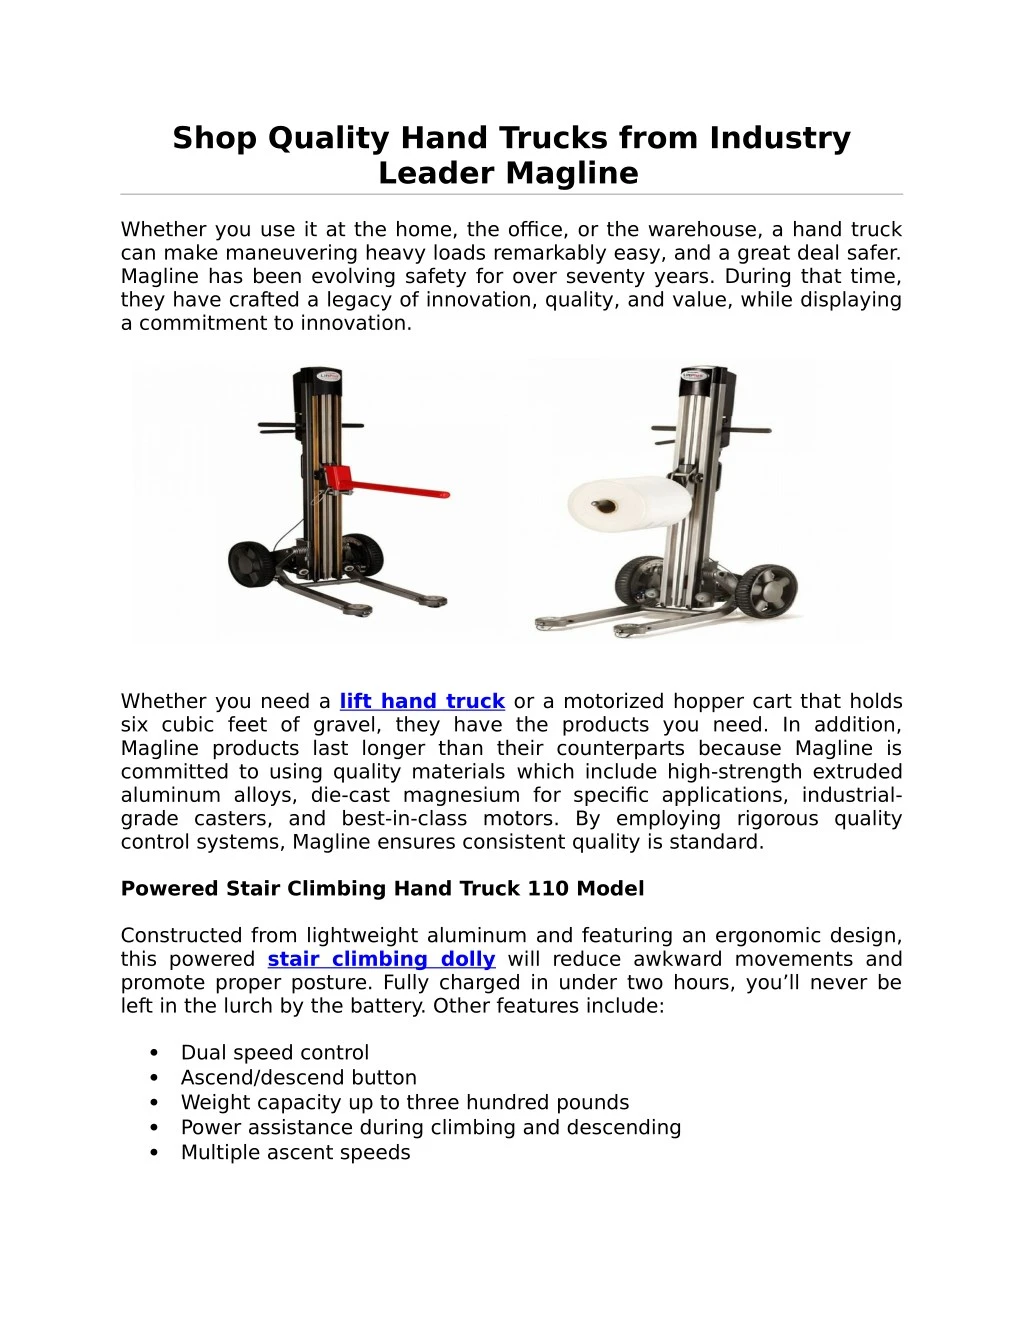 shop quality hand trucks from industry leader